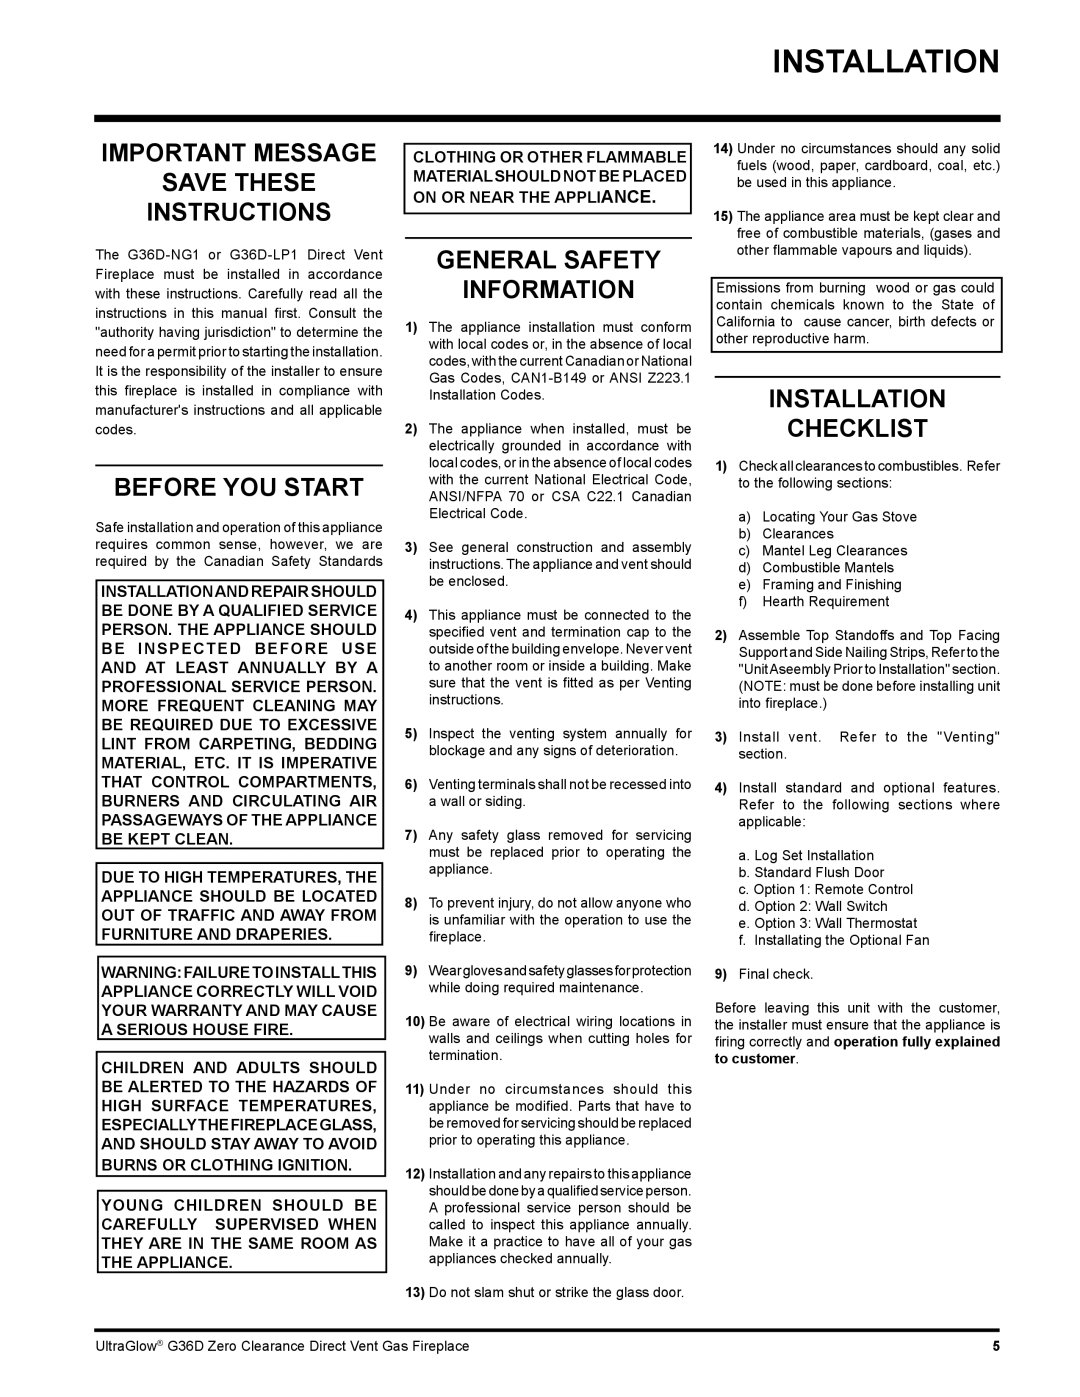 Regency G36D installation manual Important Message Save These Instructions, Before You Start, Installation Checklist 